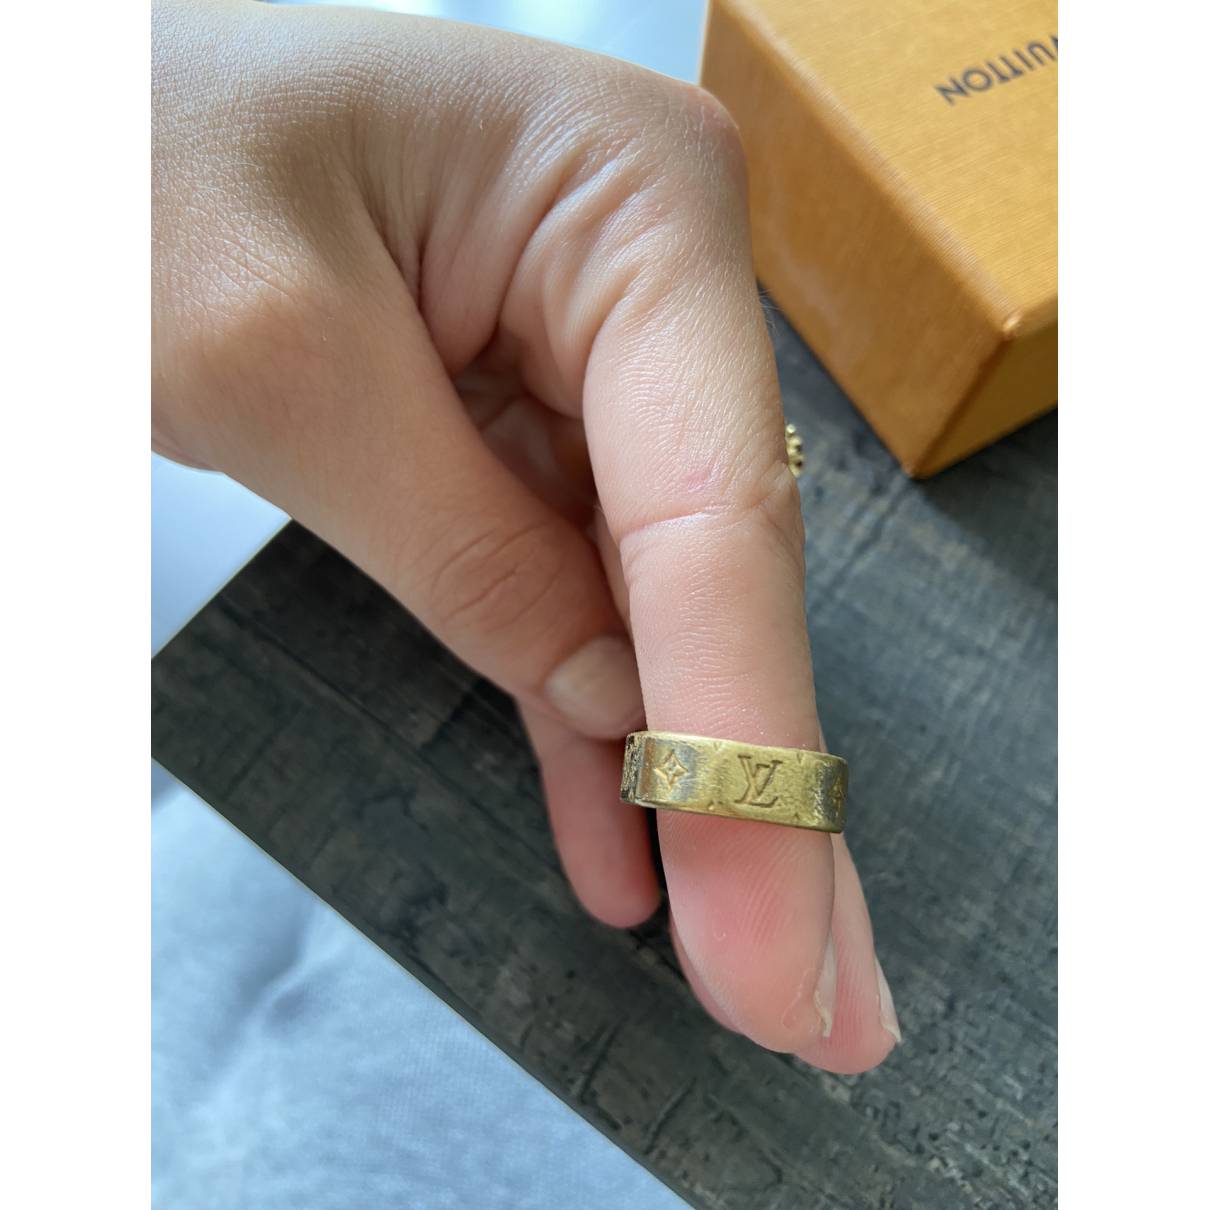 Thoughts on the Nanogram ring? LV Rings in general? : r/Louisvuitton